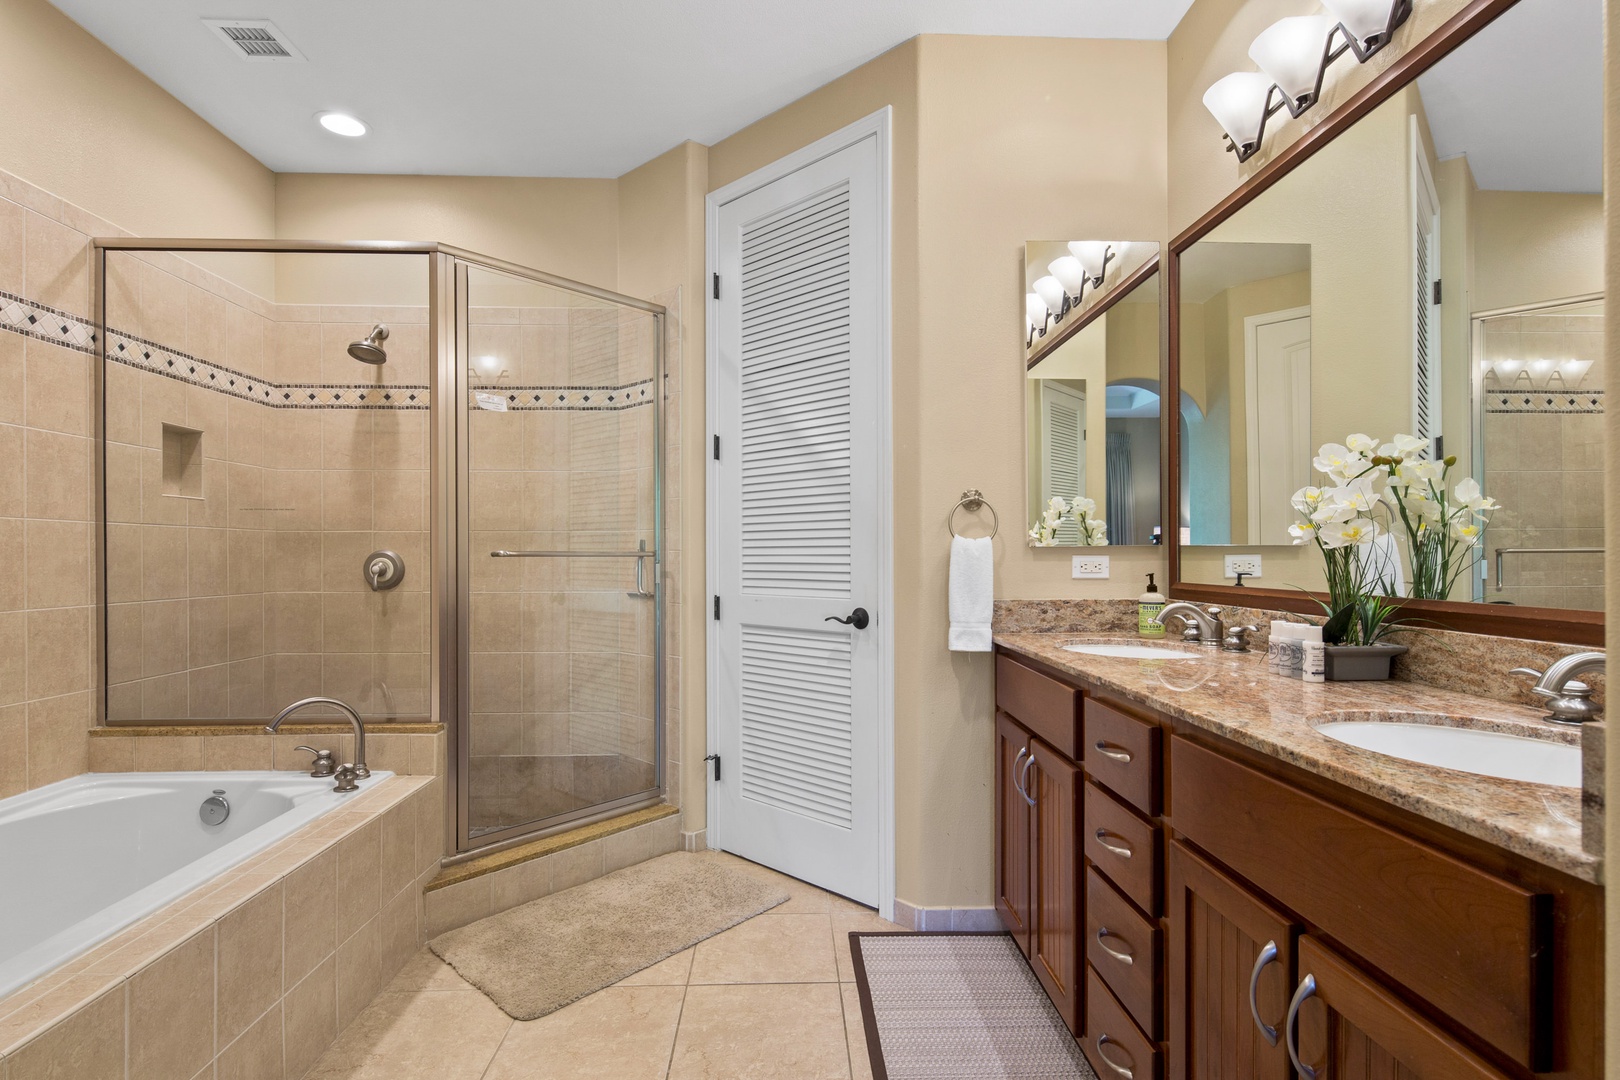 Ensuite bathroom with separate soaking tub, stand up shower and walk in closet